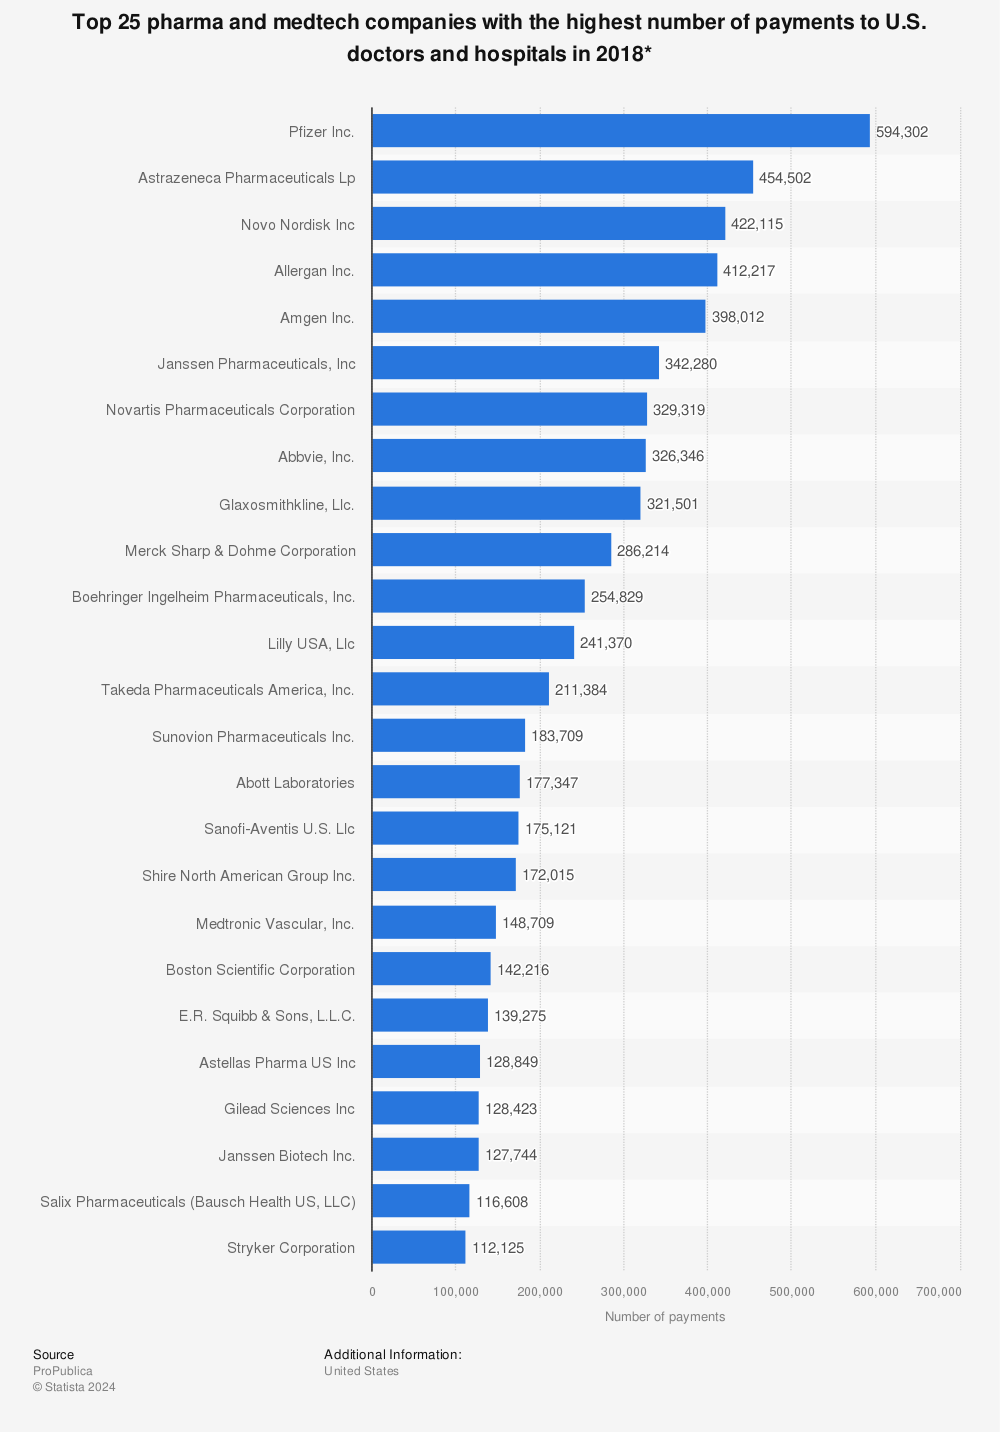 Statistic: Top 25 pharma and medtech companies with the highest number of payments to U.S. doctors and hospitals in 2018* | Statista